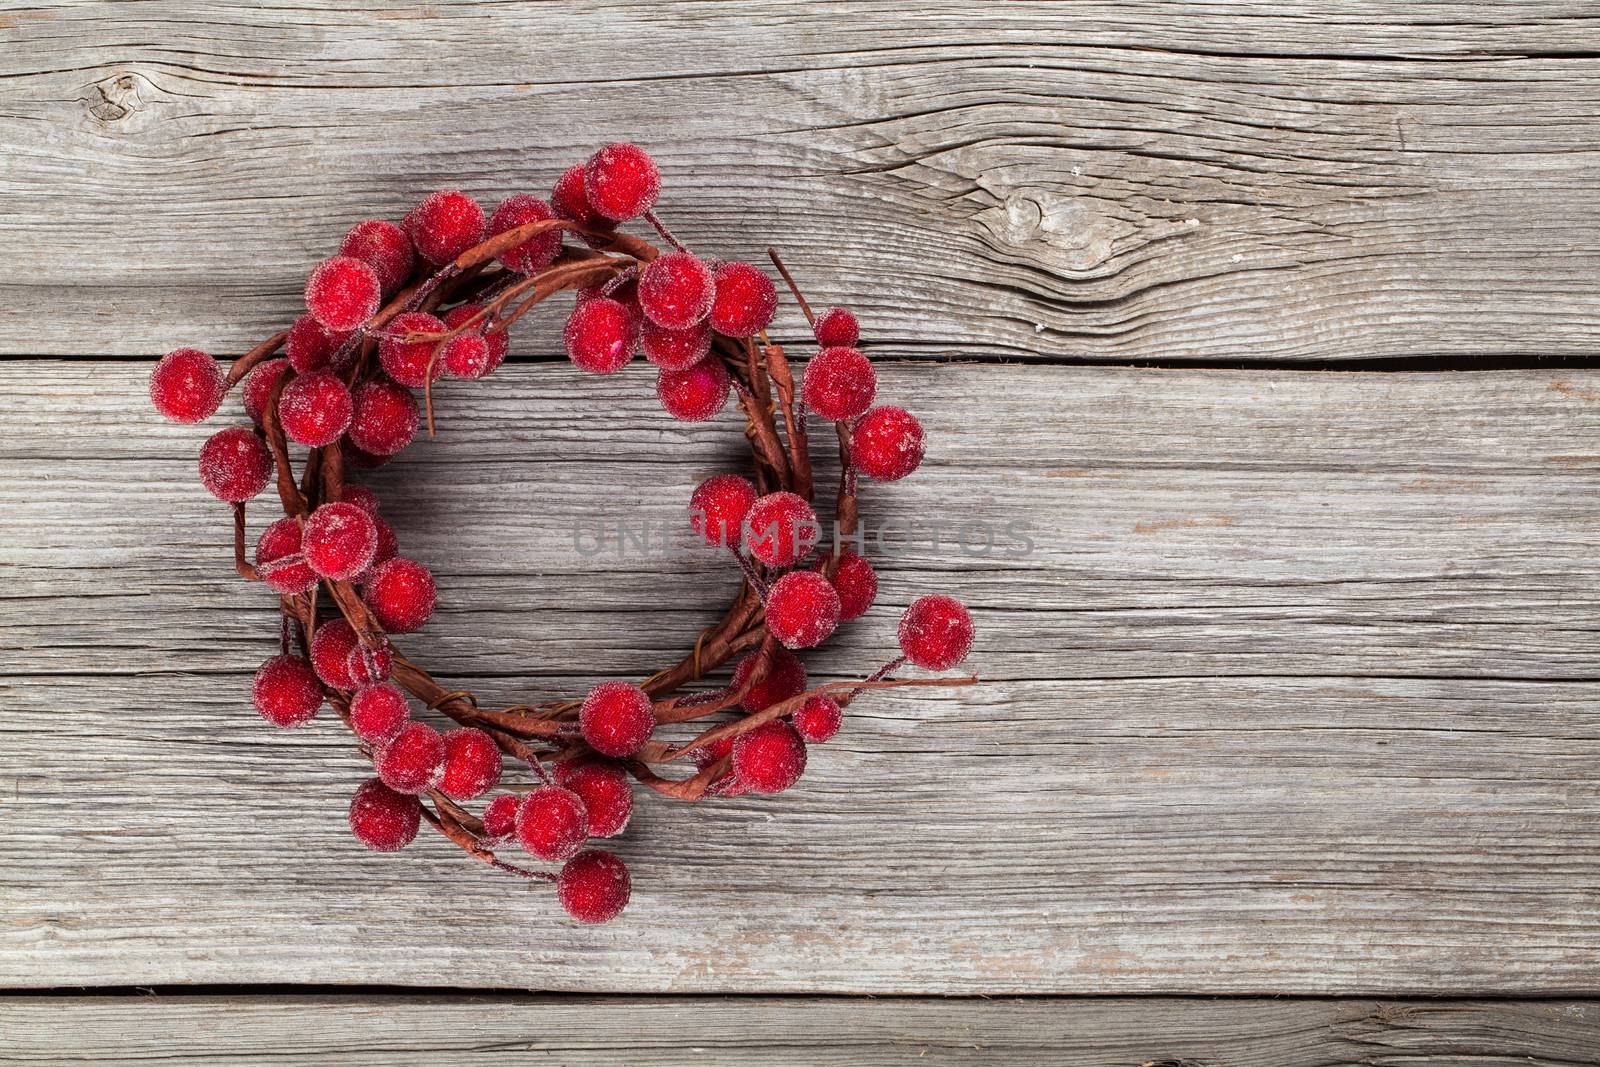 Christmas wreath from red berries on wooden background by motorolka